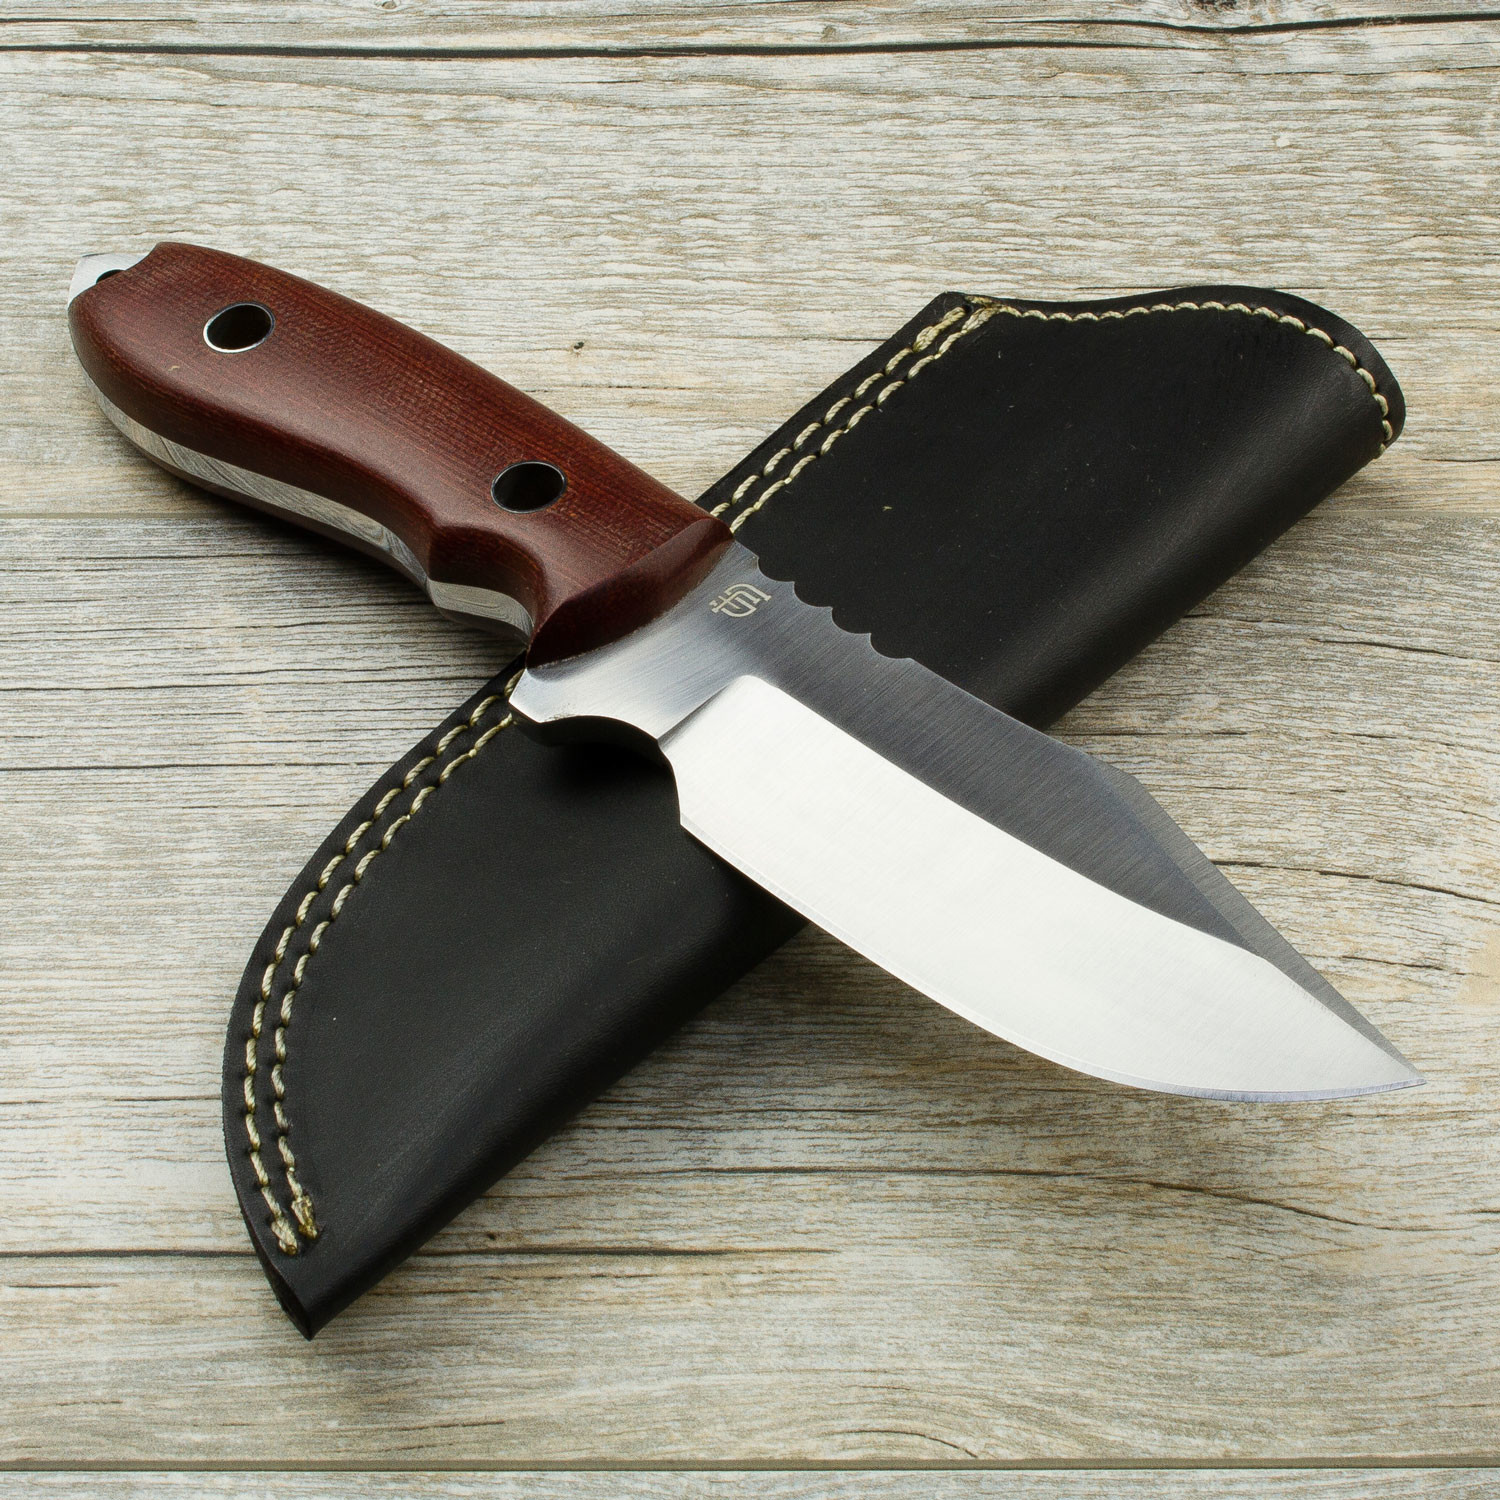 Custom Knives Tactical And Military Knives